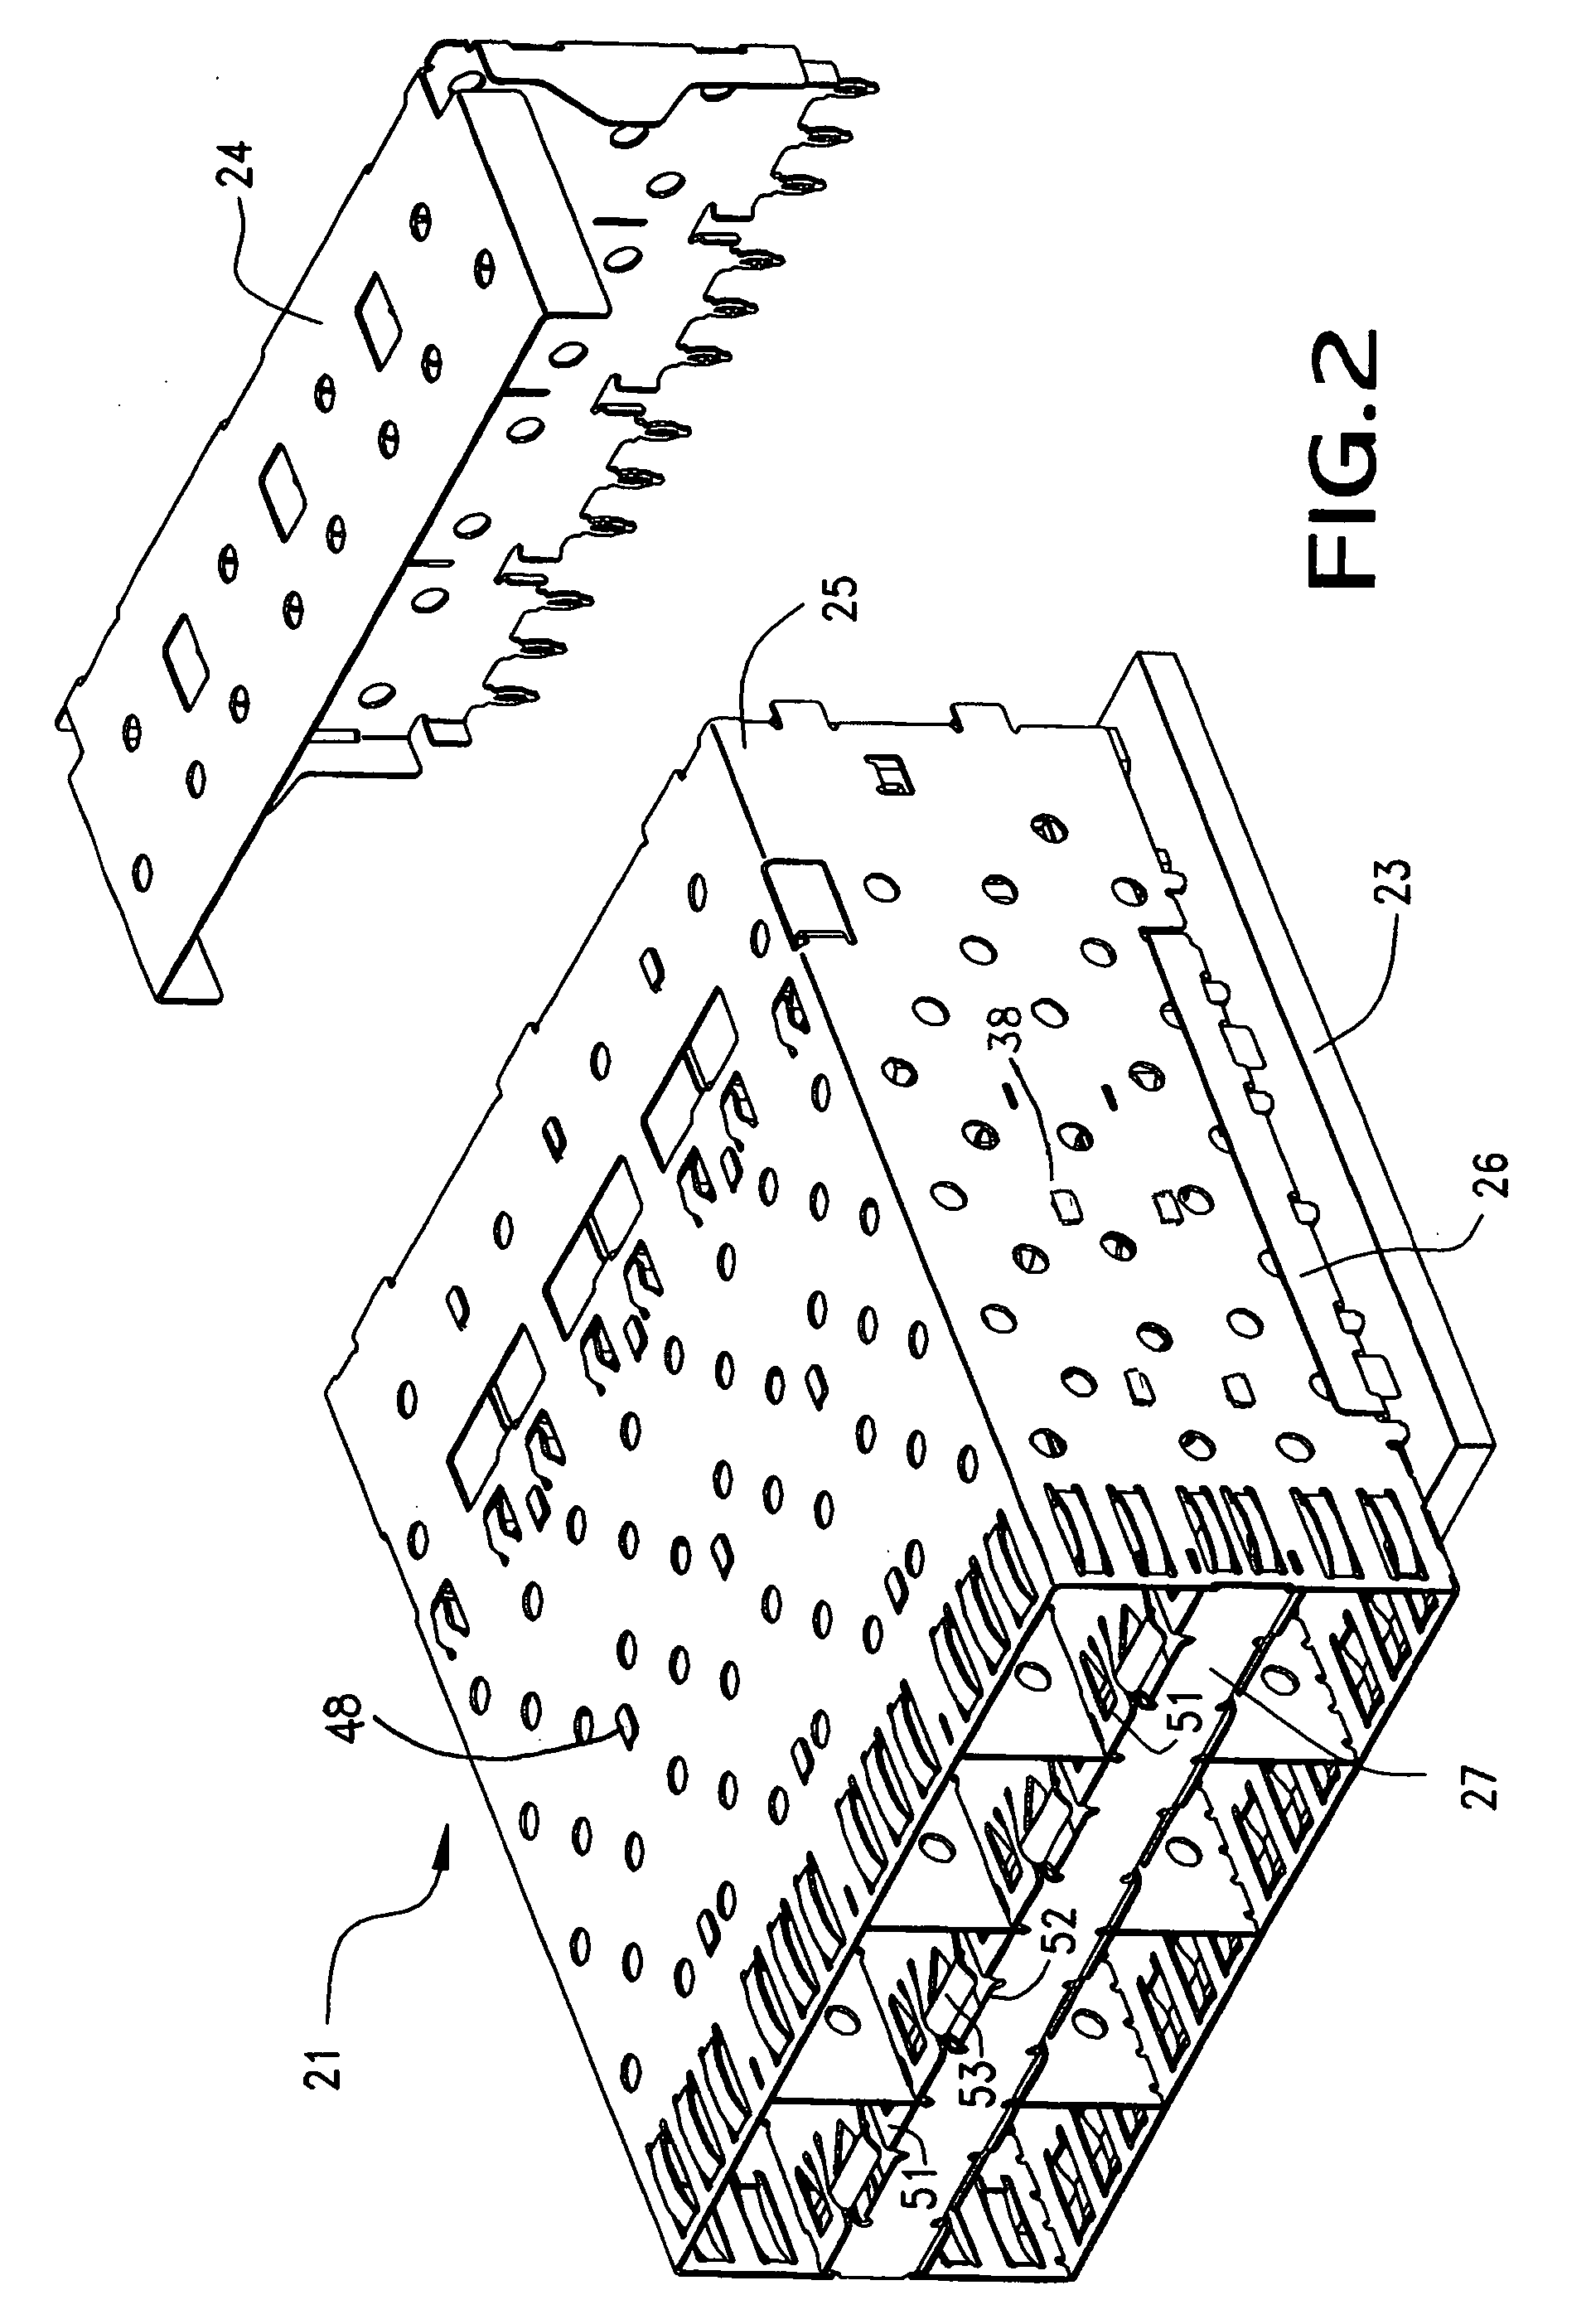 Shielded cage assembly for electrical connectors